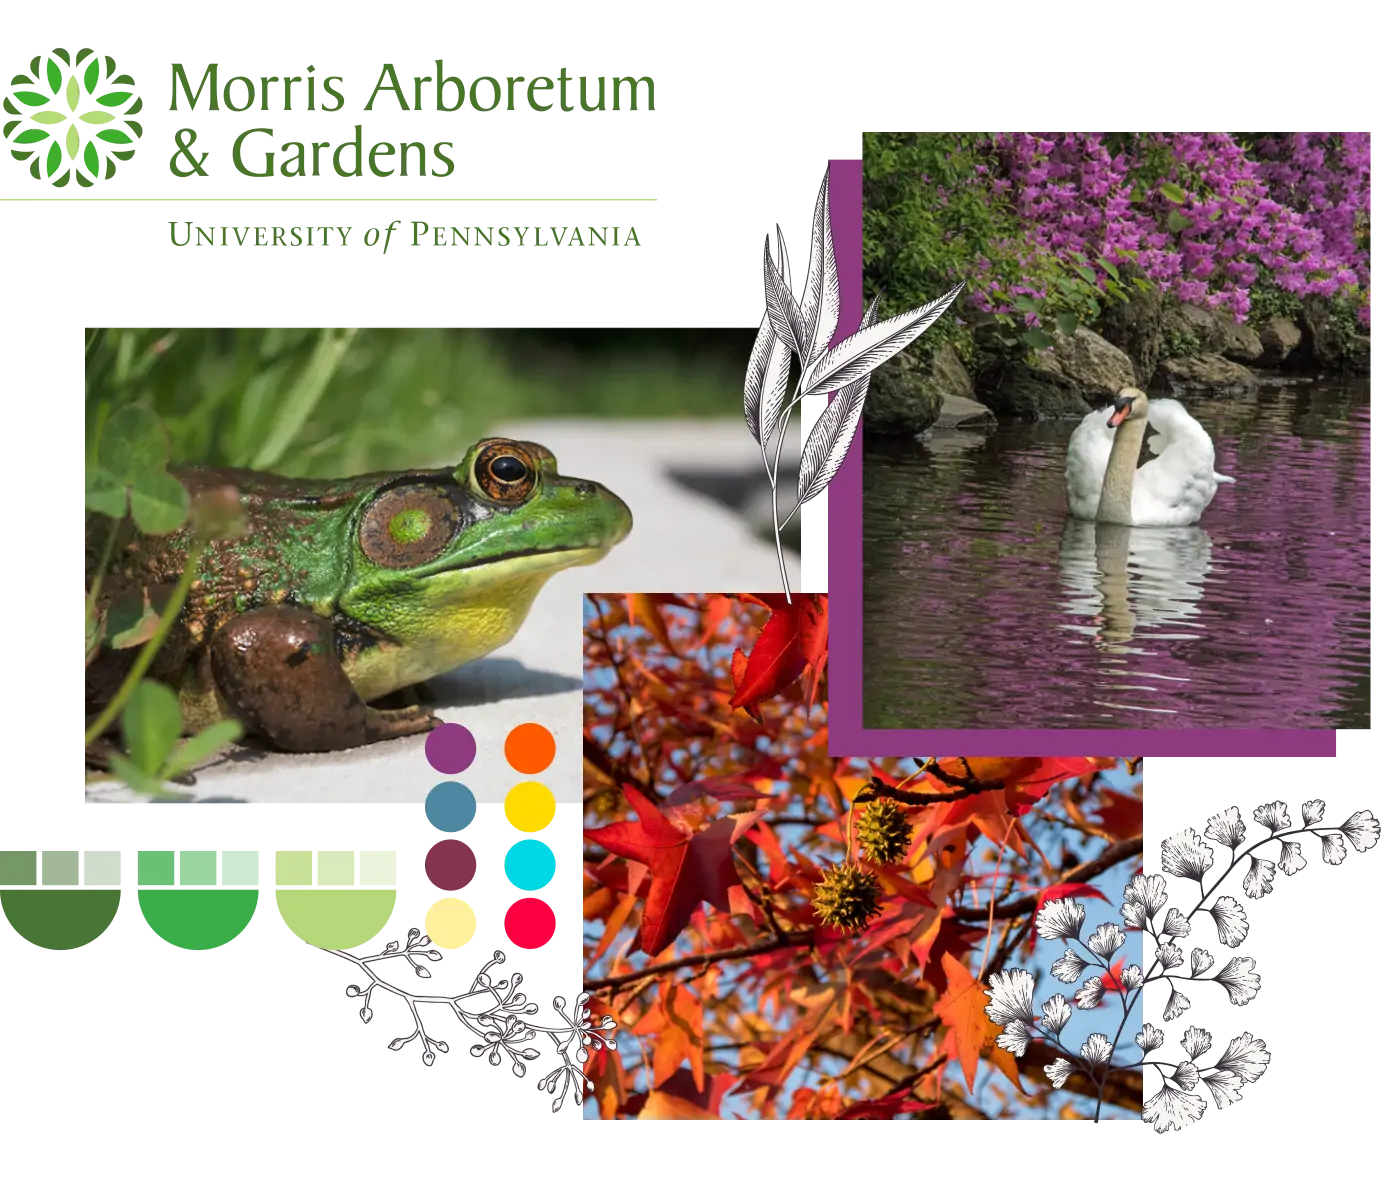 a collage of the Morris Arboretum & Gardens logo with flower icon and photos of a frog, swan, and fall foliage